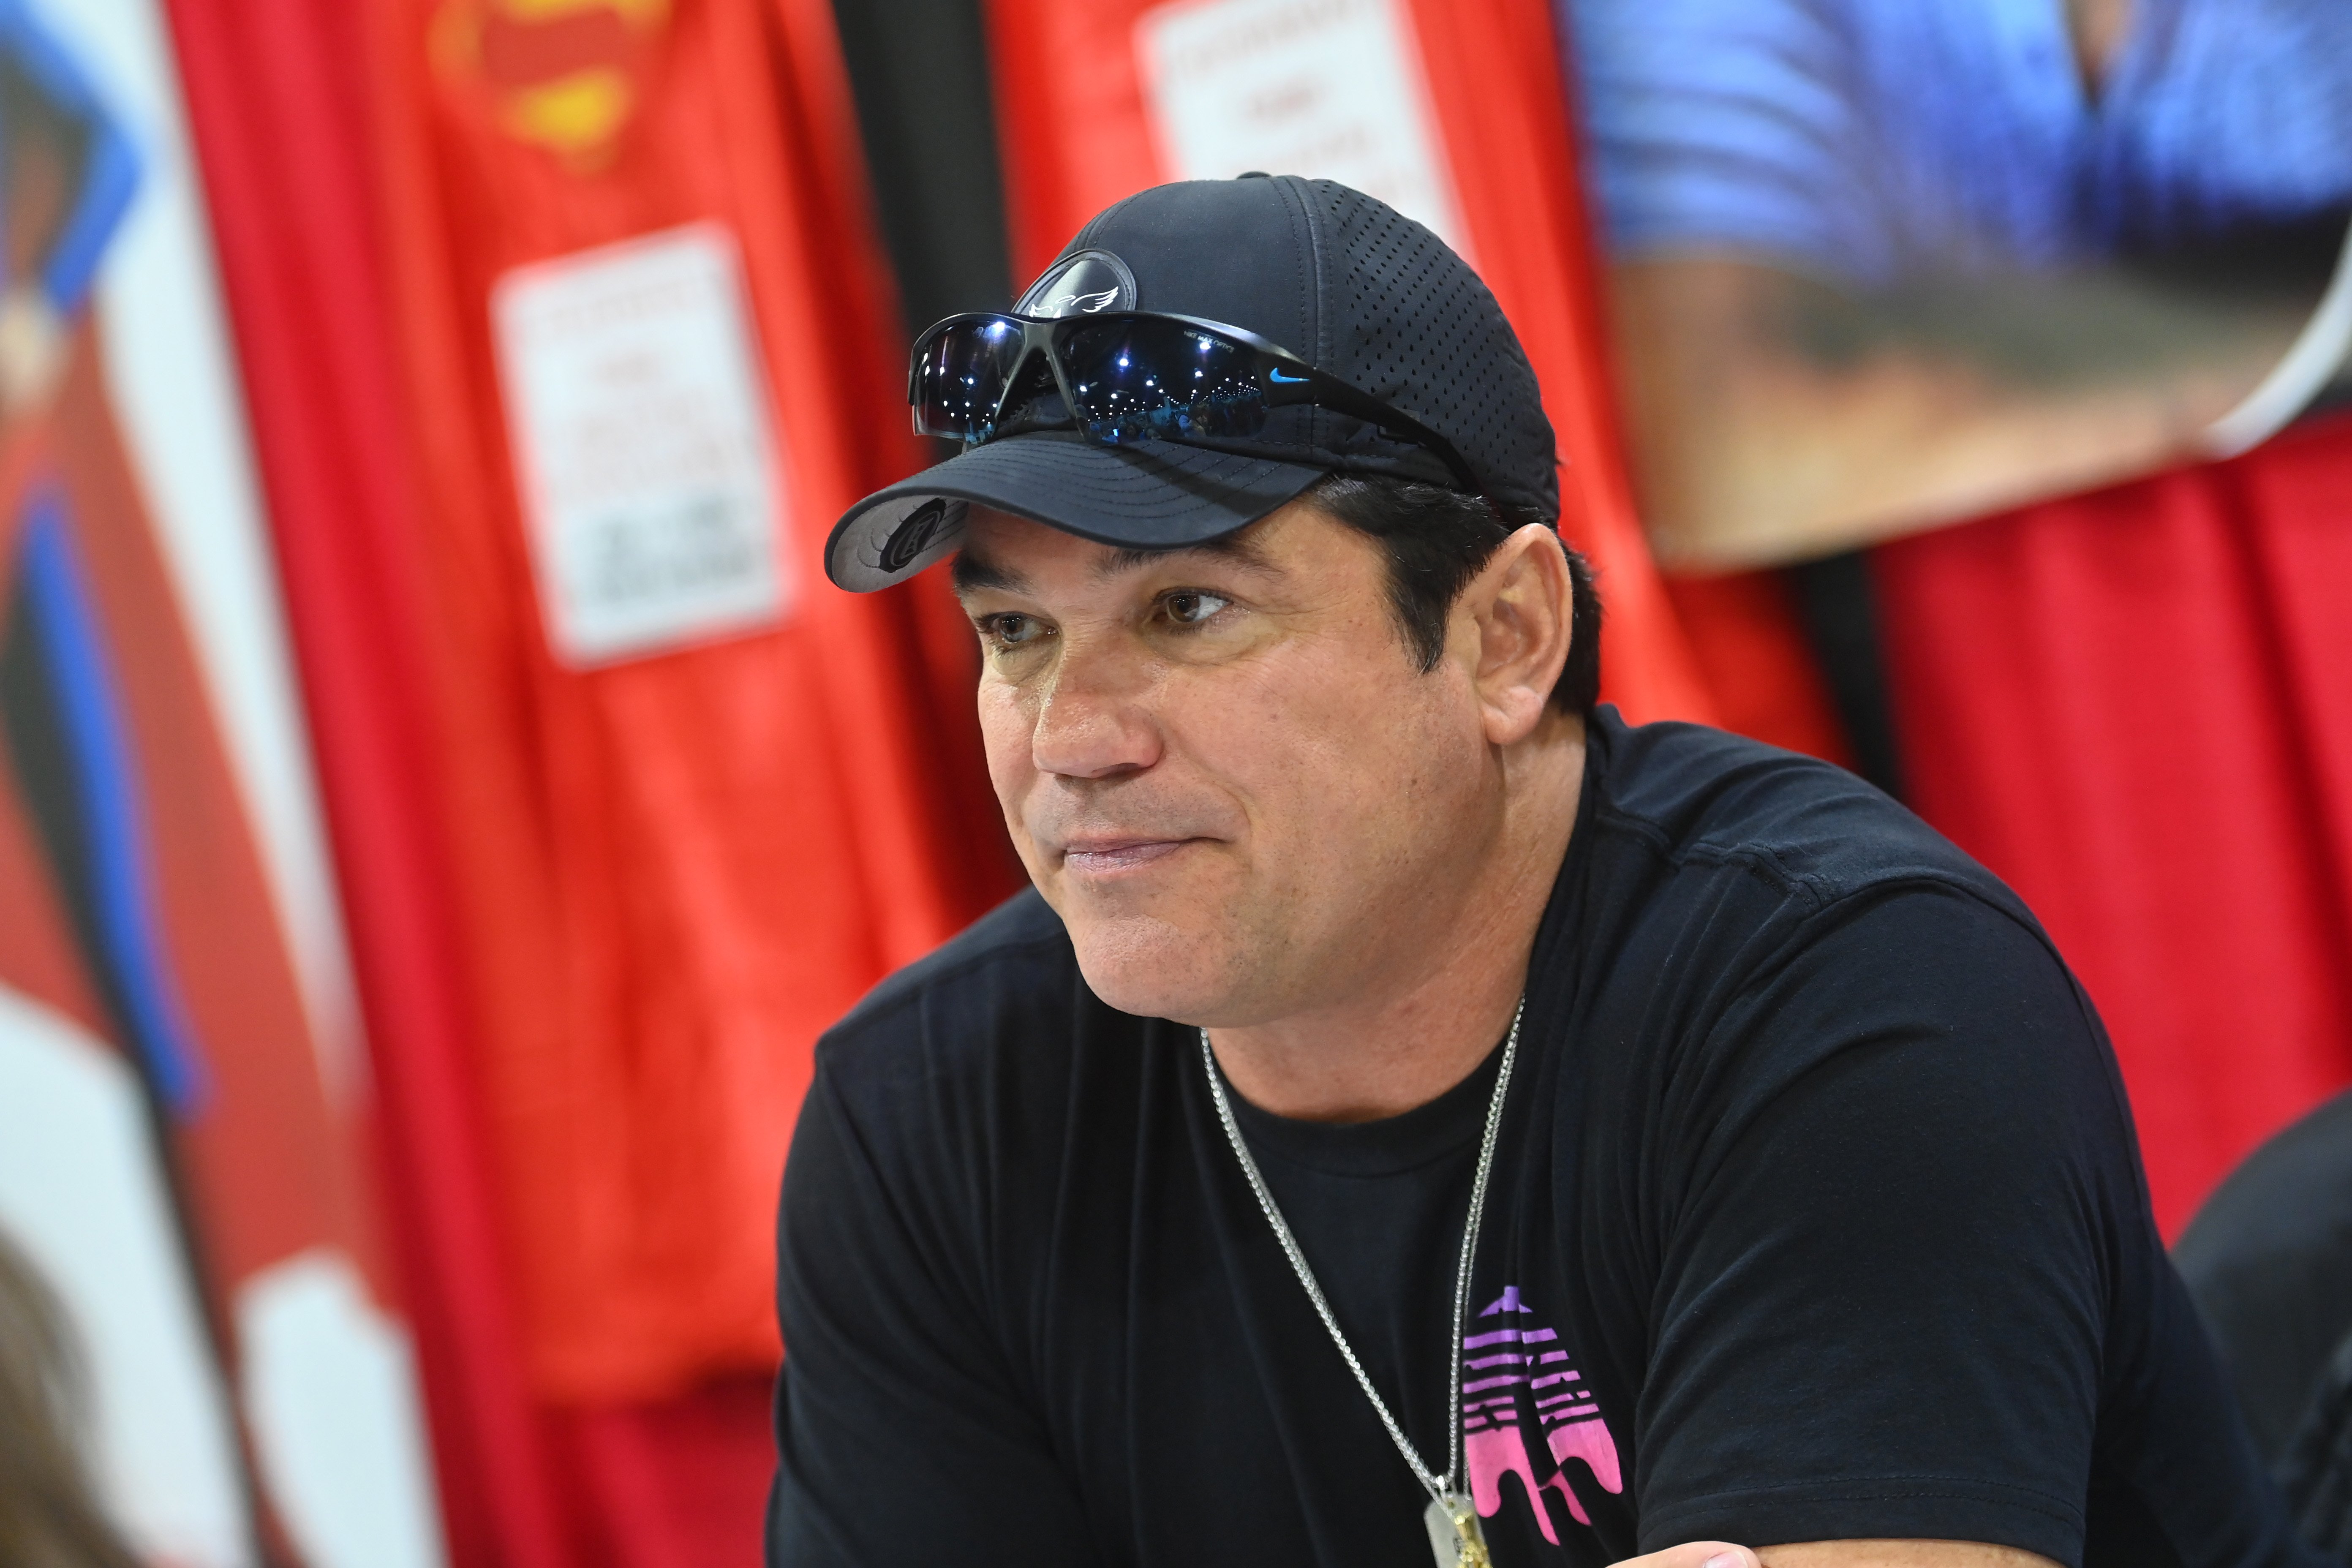 Actor Dean Cain attends the 2022 Fandemic Tour at Georgia World Congress Center on March 19, 2022 in Atlanta, Georgia | Source: Getty Images